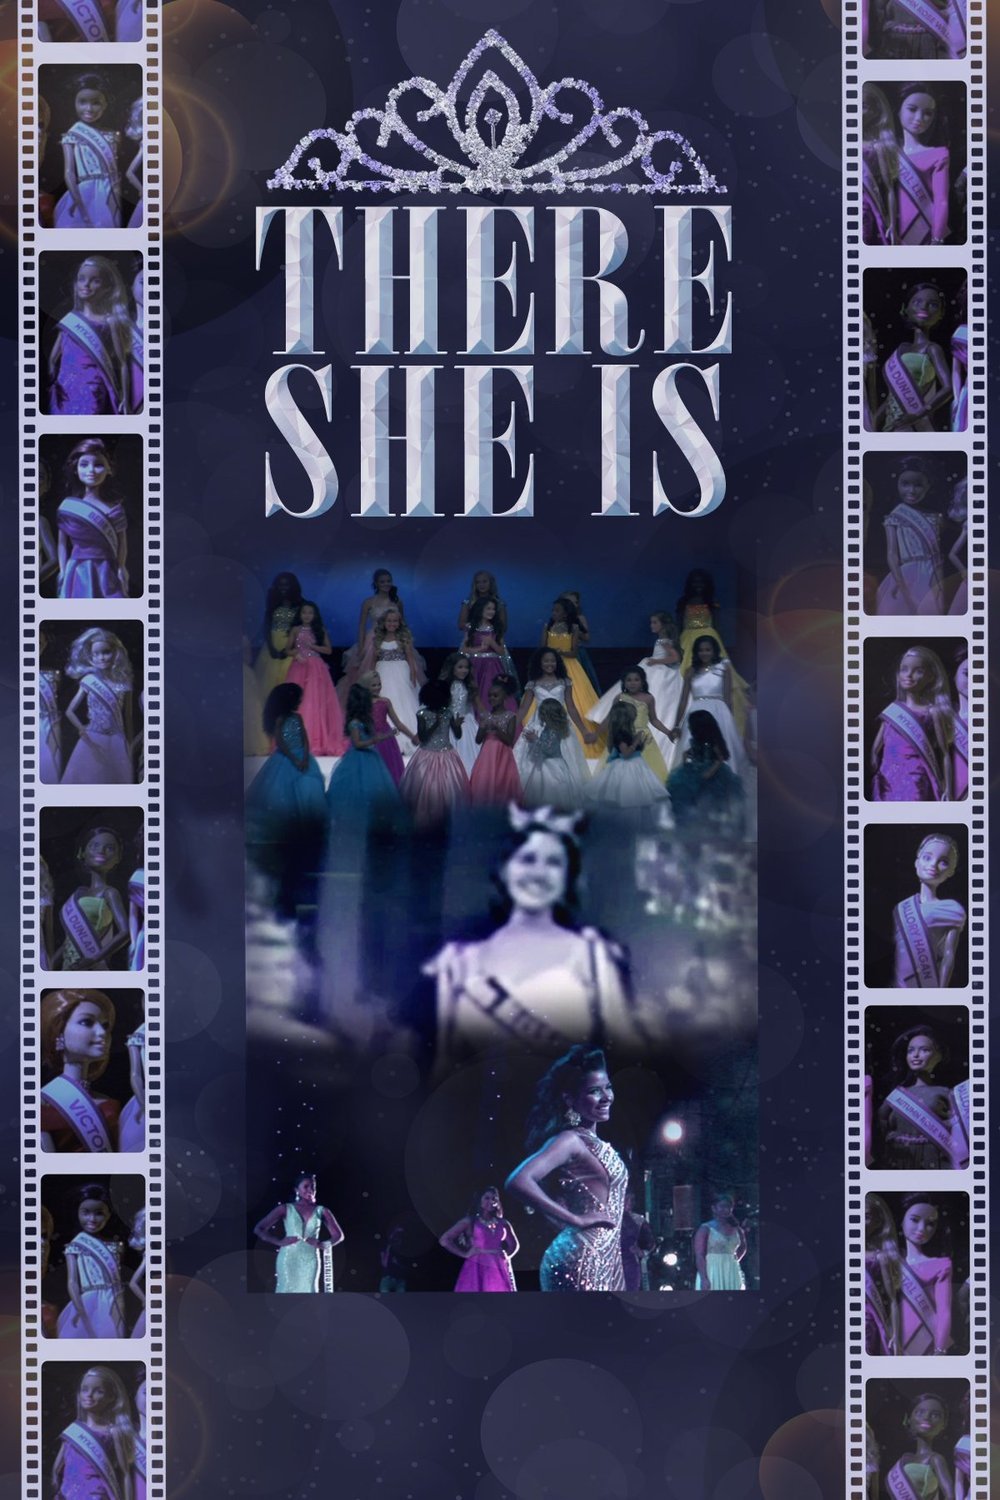 Poster of the movie There She Is